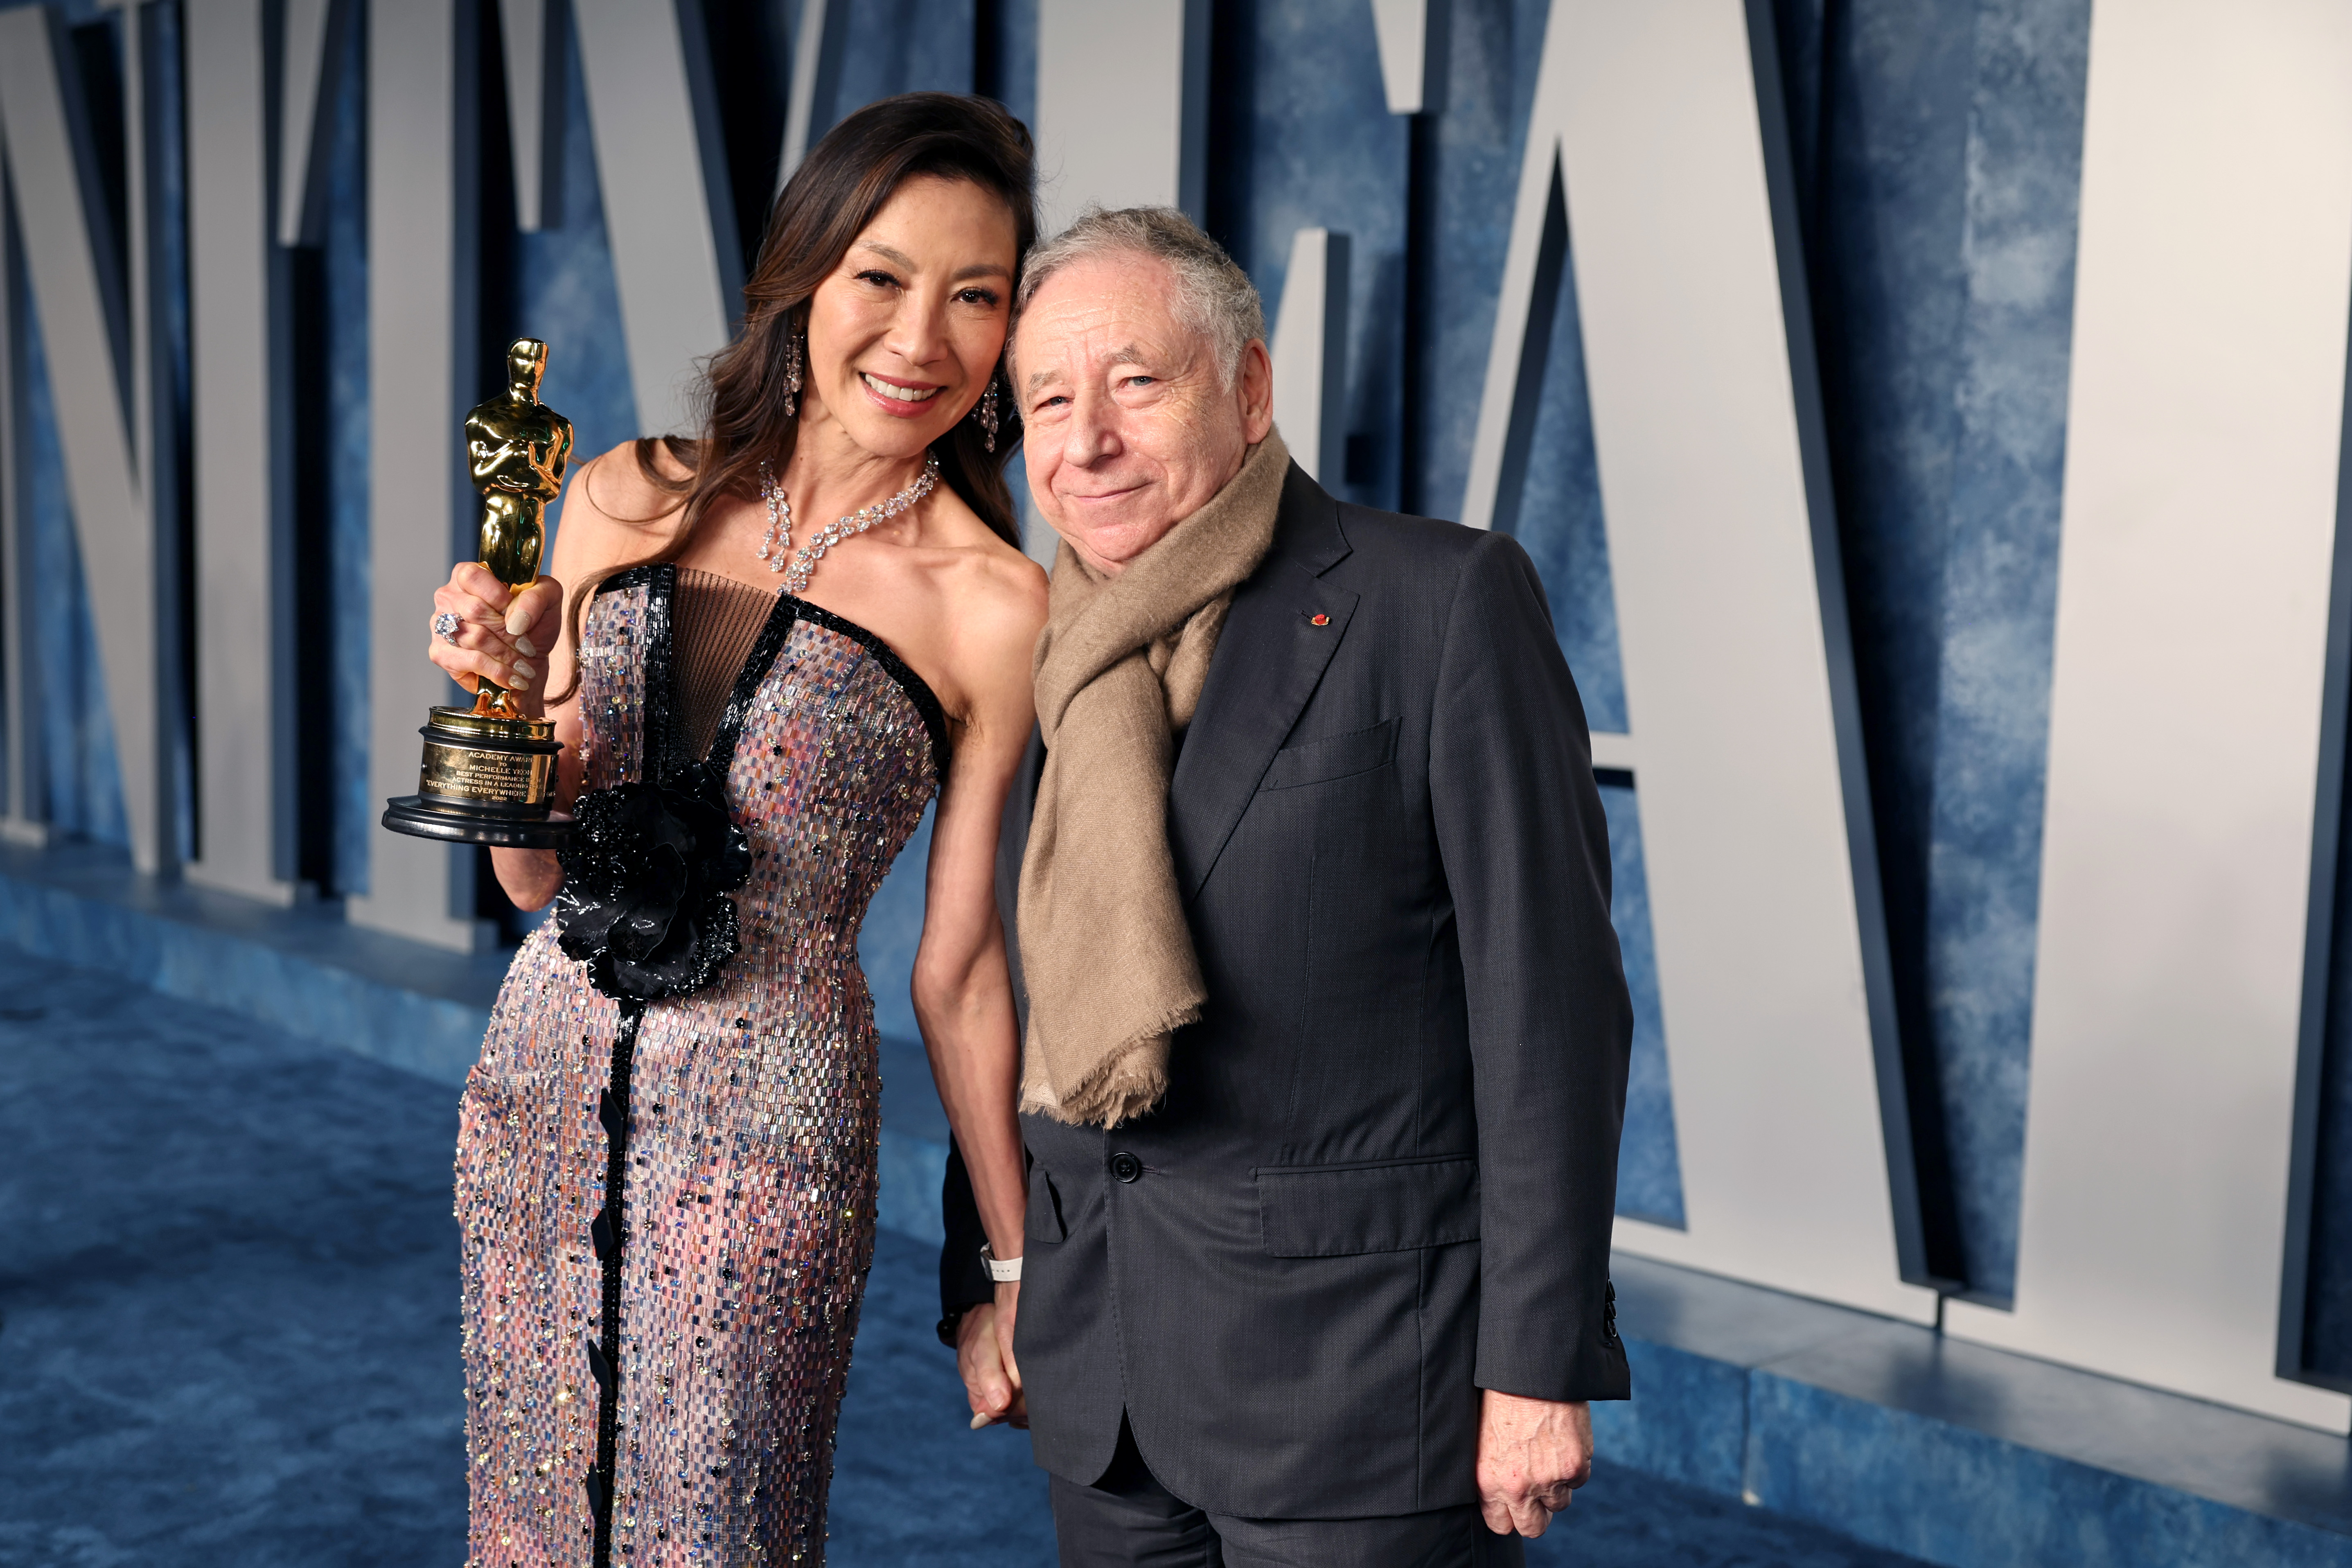 Michelle Yeoh and Jean Todt at the Vanity Fair Oscar Party at Wallis Annenberg Center for the Performing Arts in Beverly Hills, California, on March 12, 2023. | Source: Getty Images